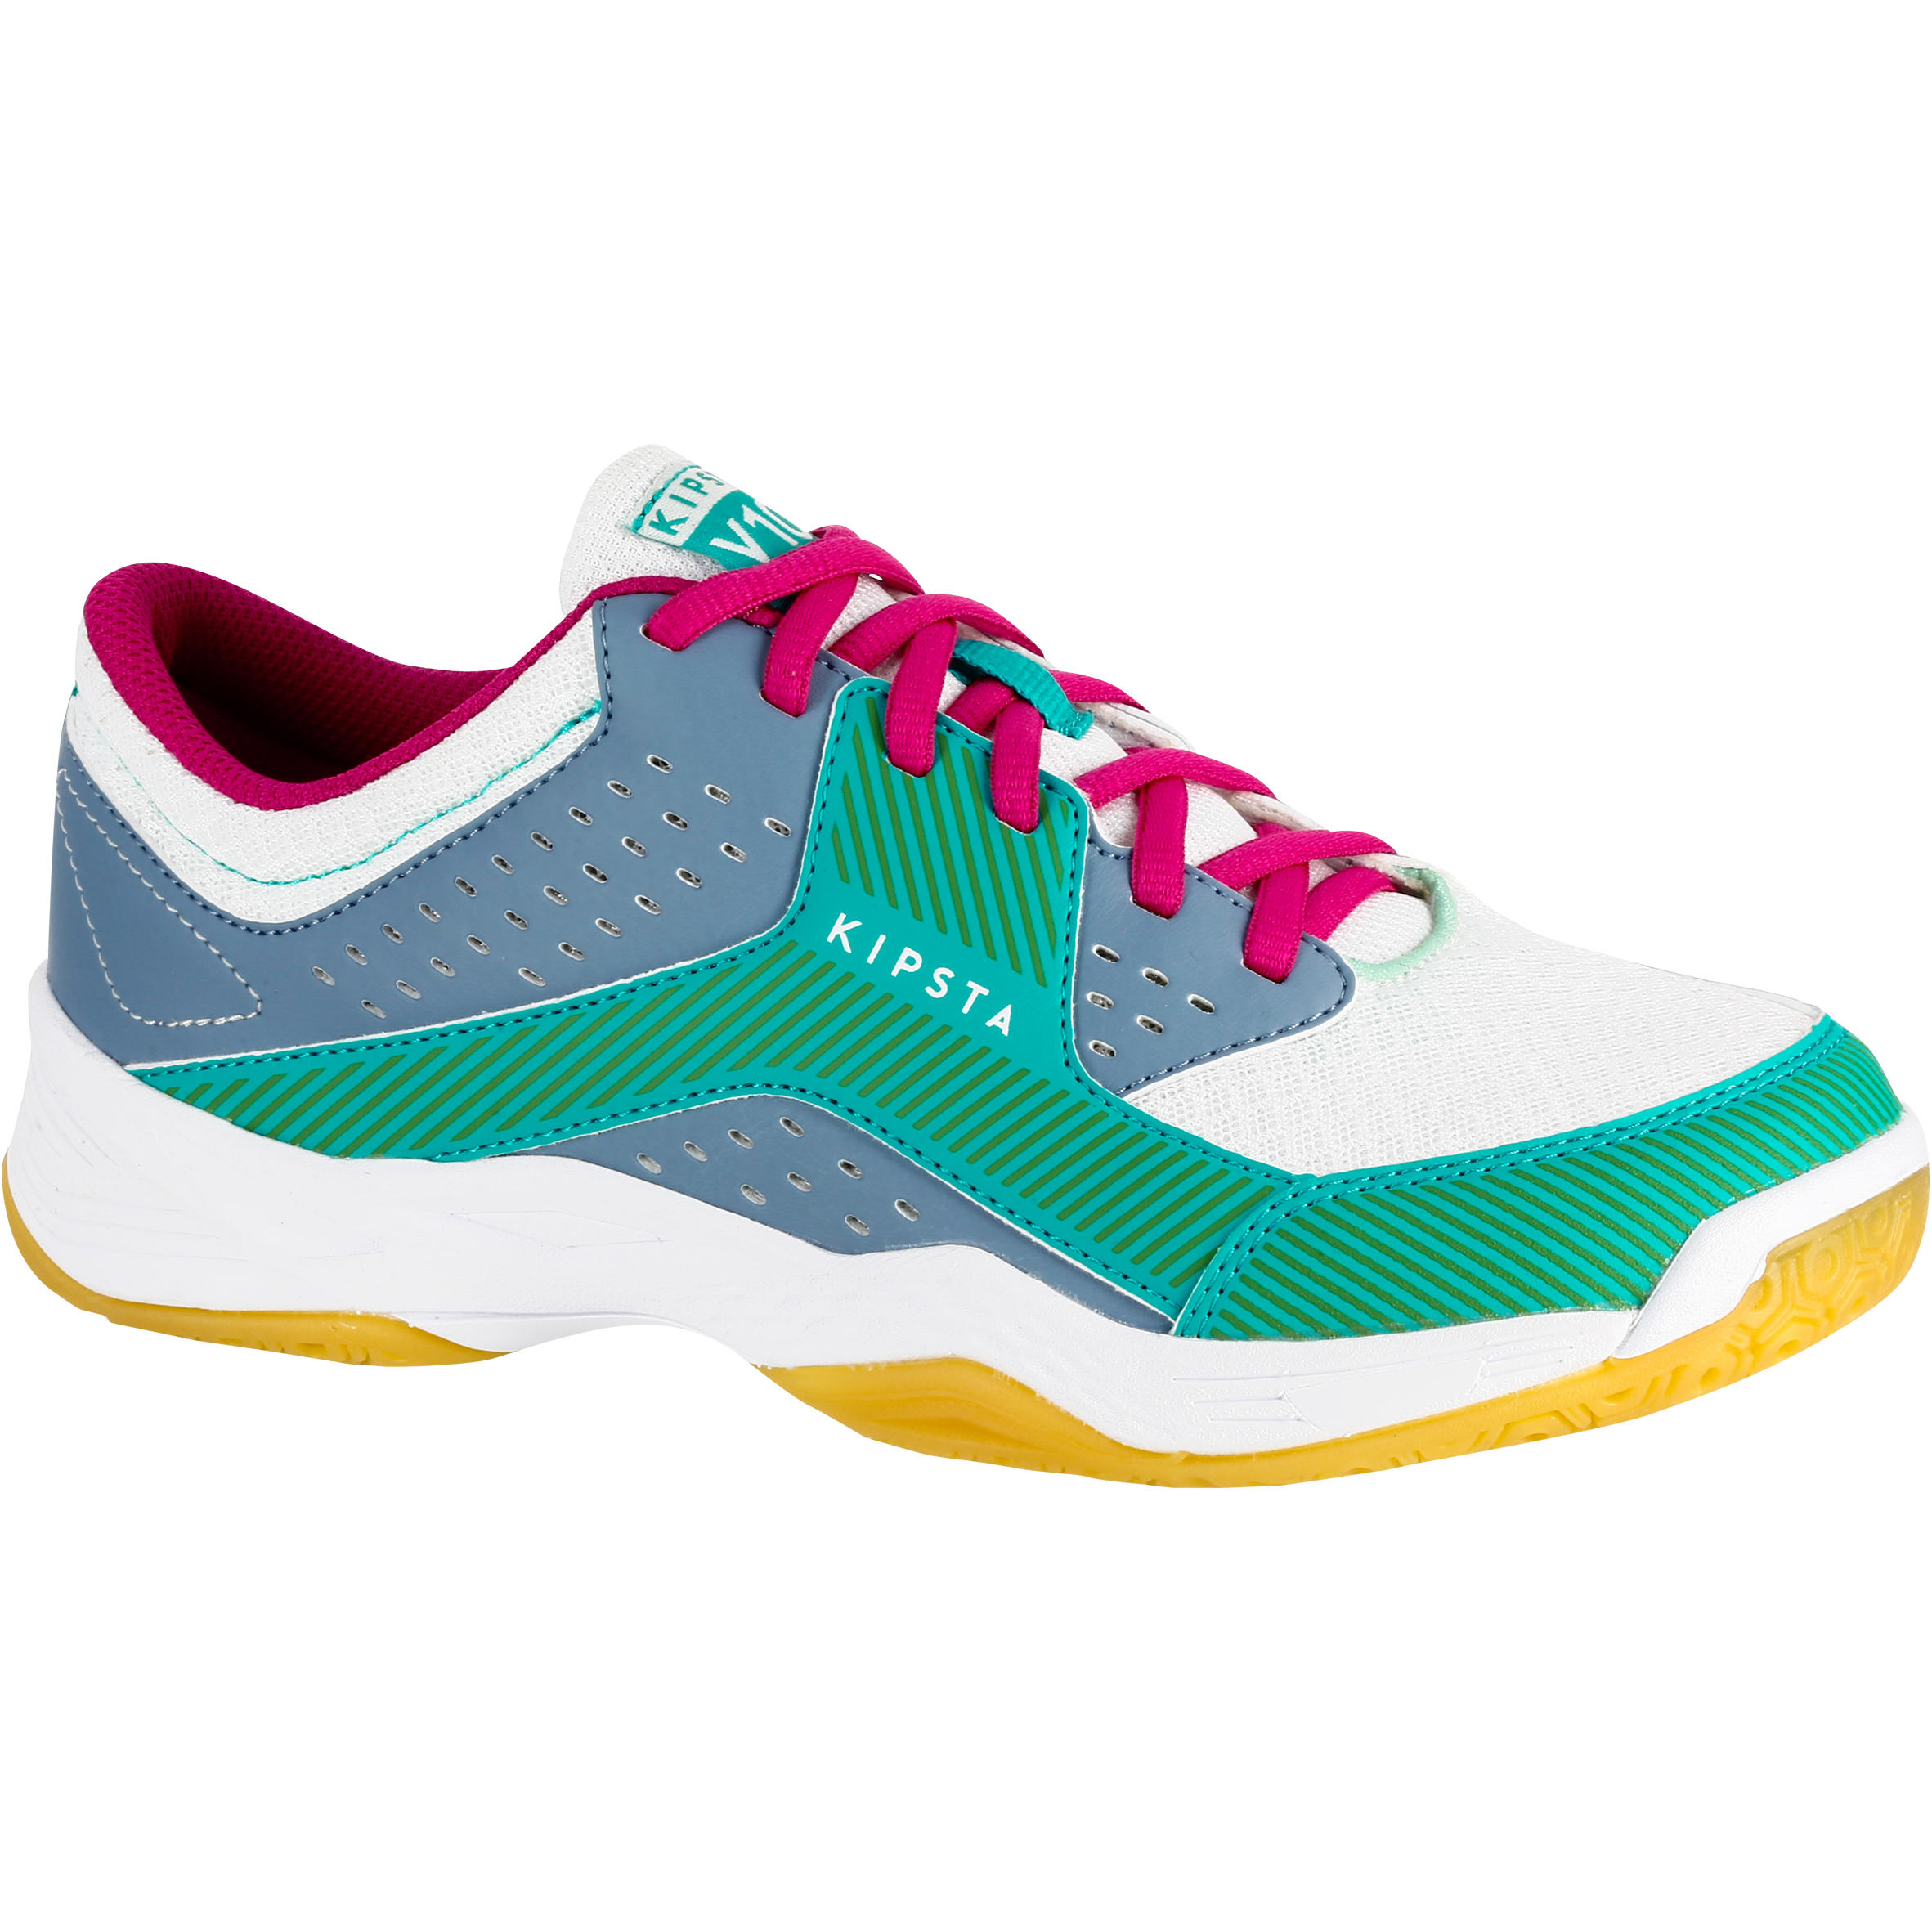 V100 Women's Volleyball Shoes - Blue 